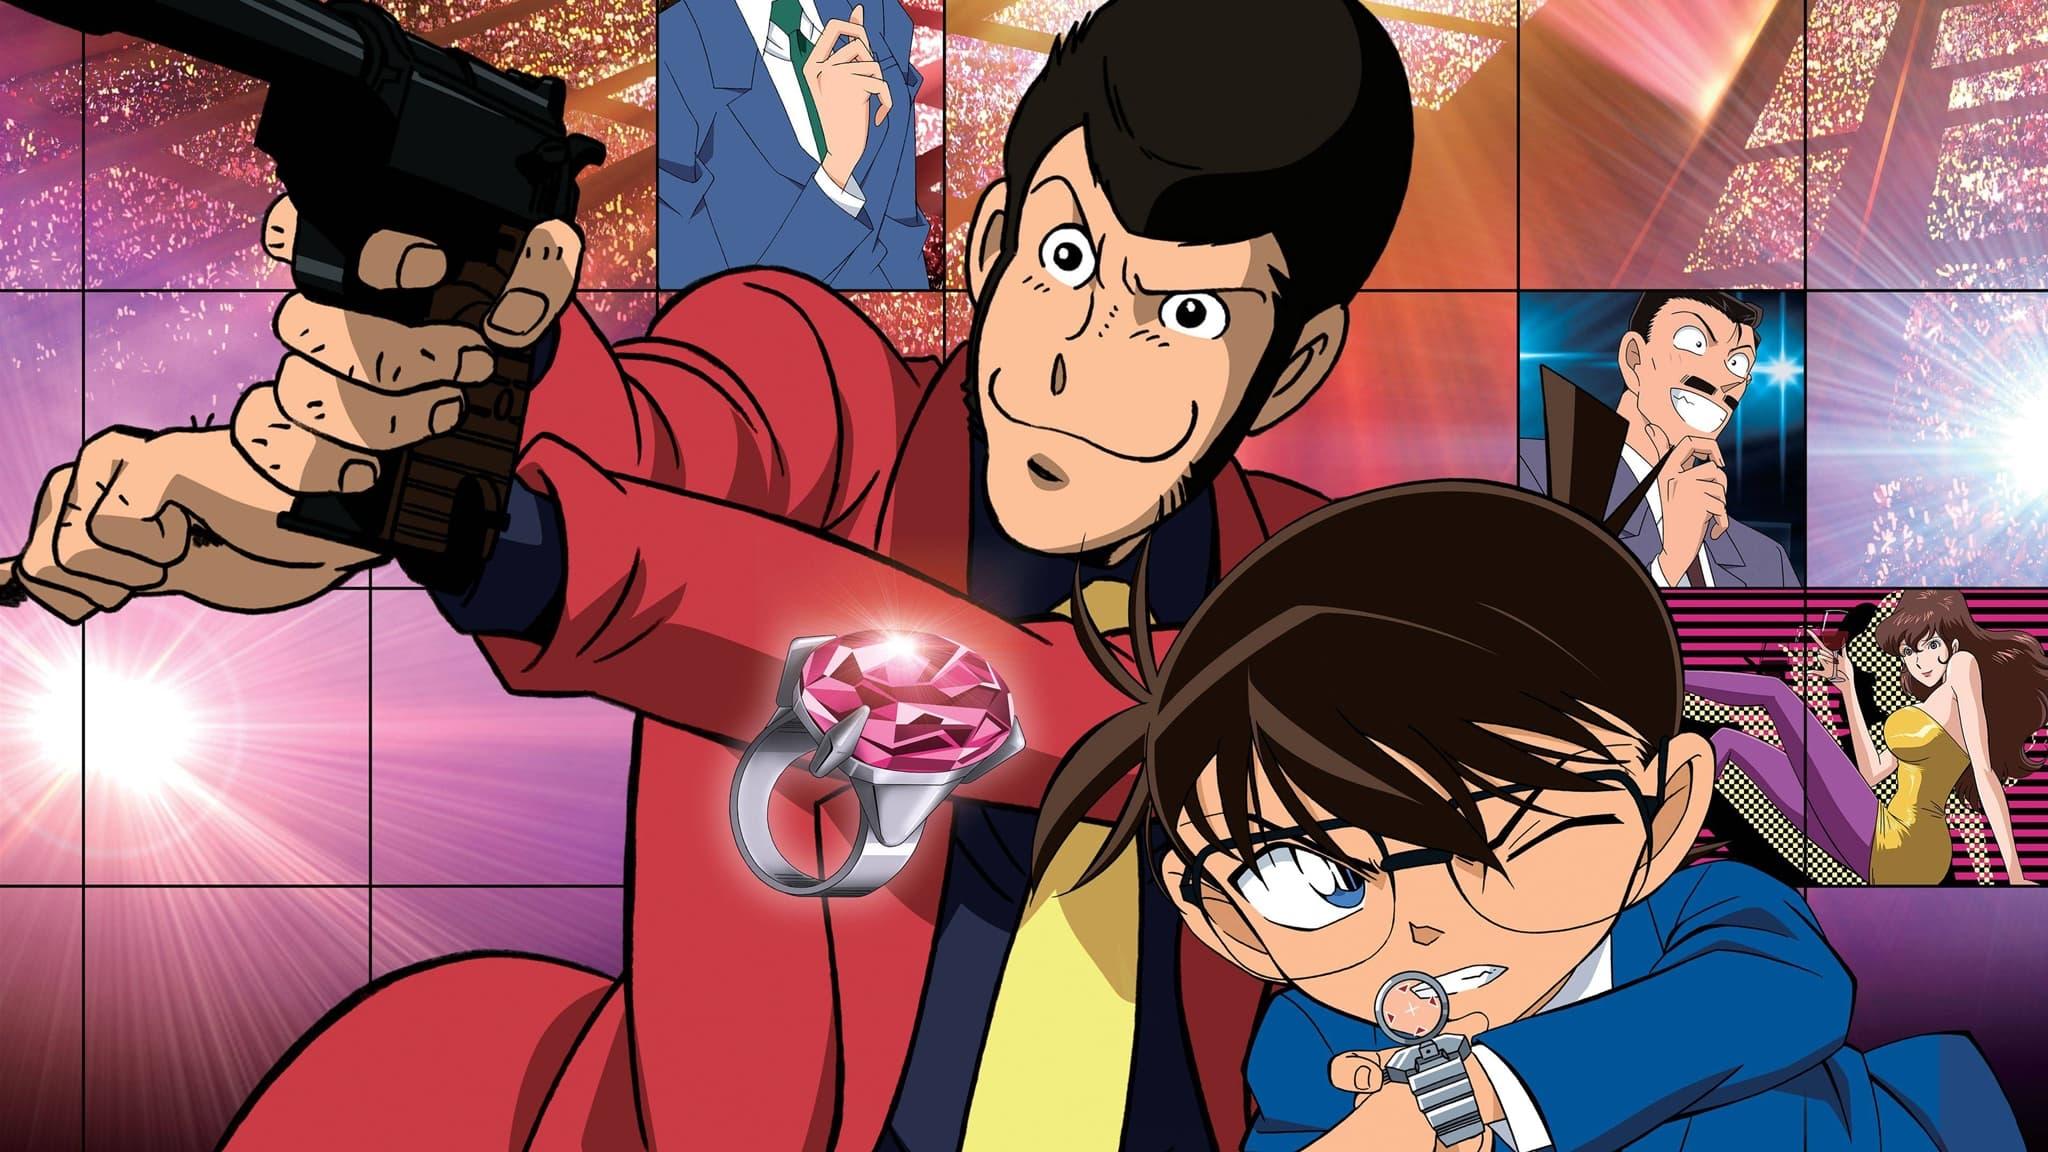 Lupin the Third vs. Detective Conan: The Movie backdrop